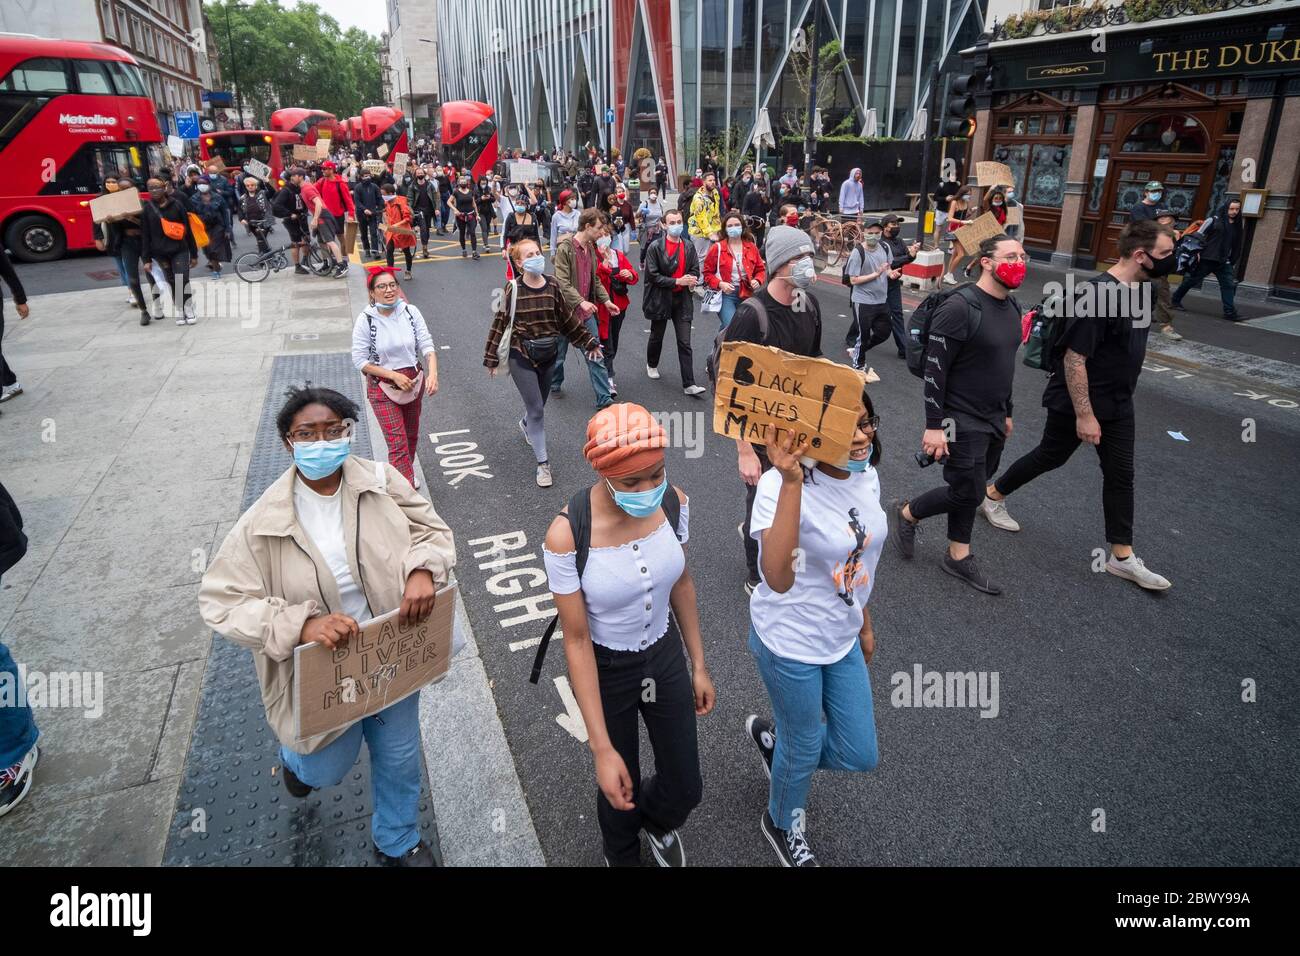 London, UK: June 3, 2020: Black Lives Matter protesters with signs walking from Westminster past Victoria Station Stock Photo